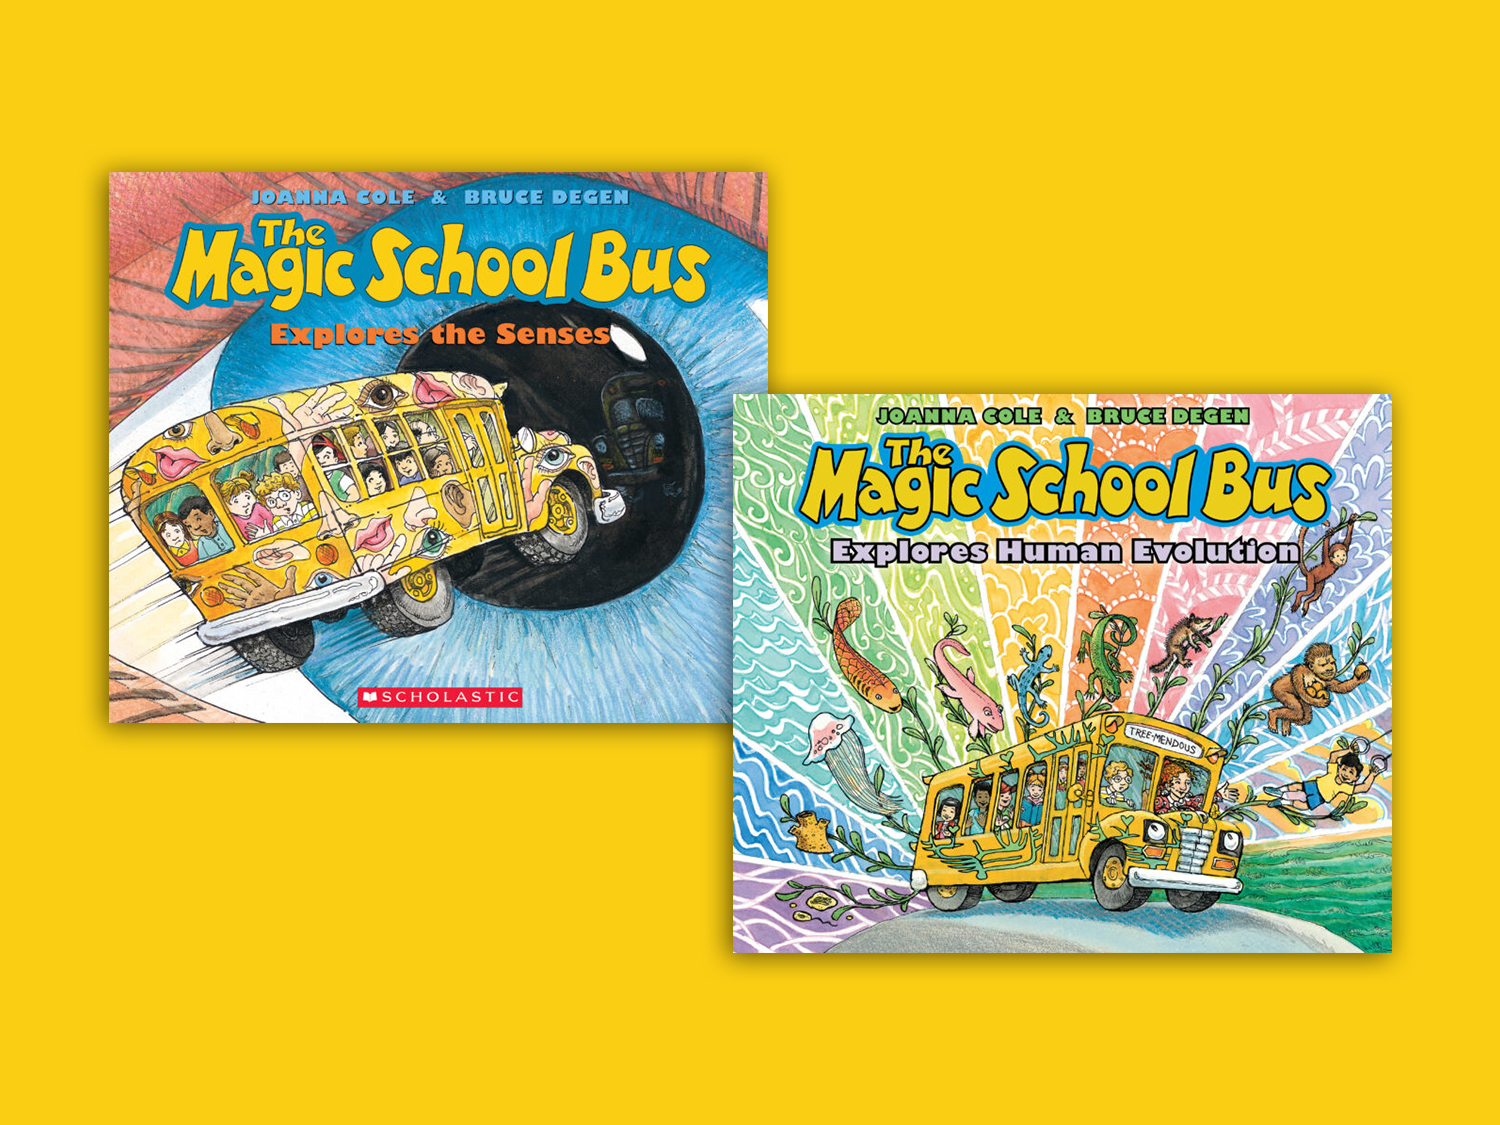 The Magic School Bus: This Iconic Series Makes Science Fun